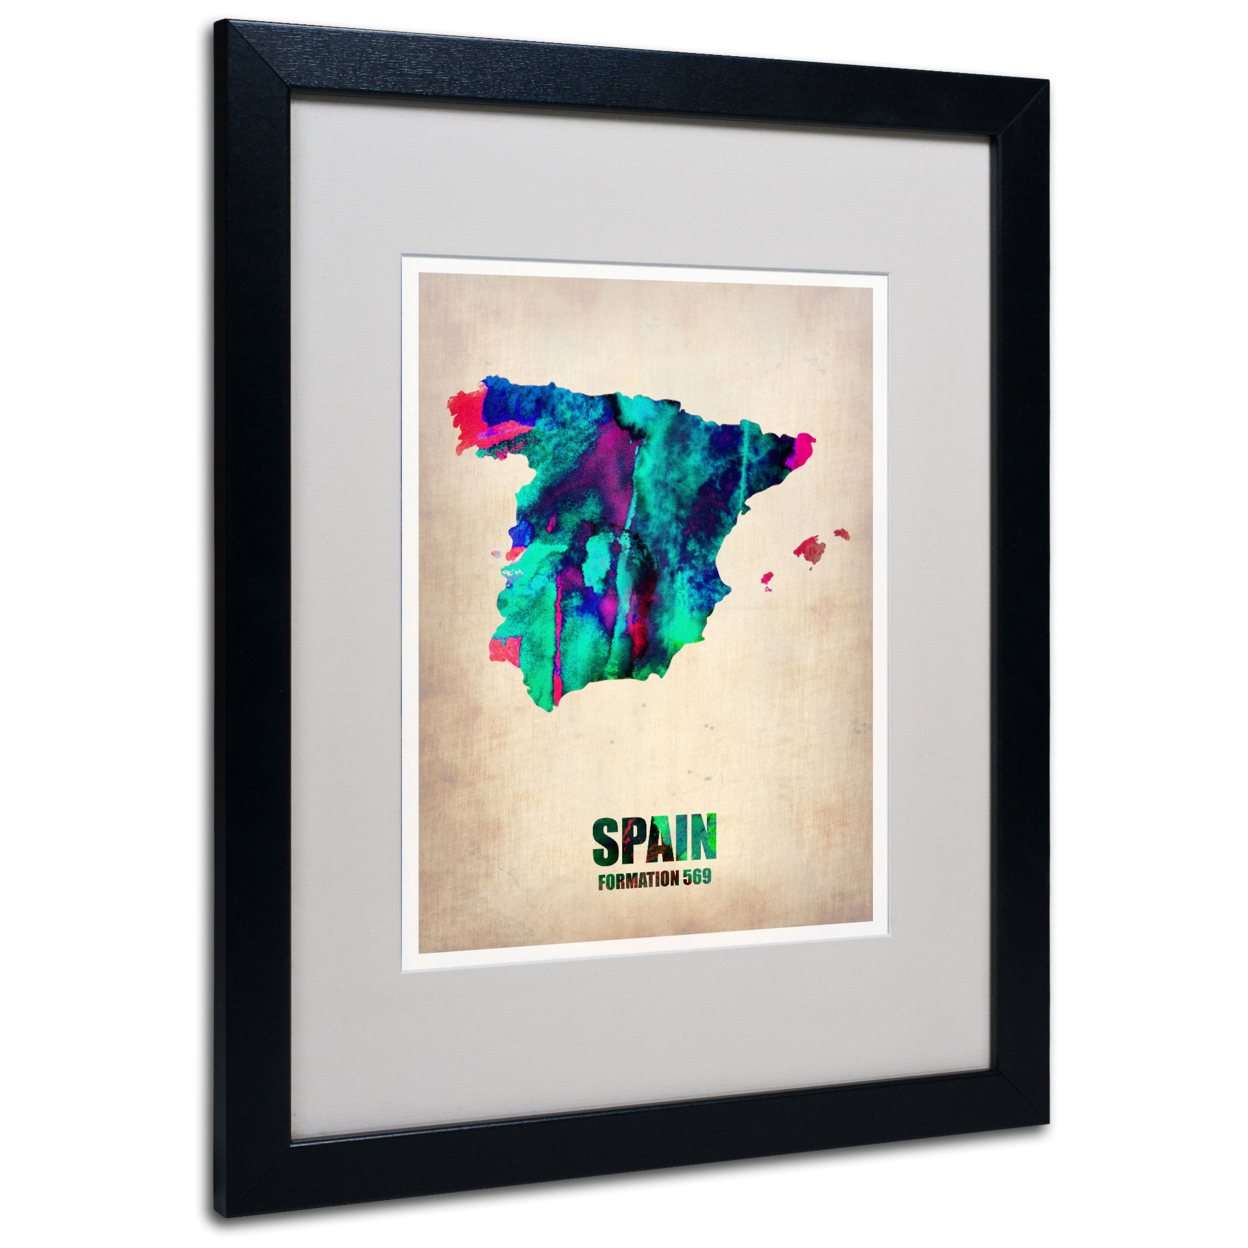 Naxart 'Spain Watercolor Map' Black Wooden Framed Art 18 X 22 Inches